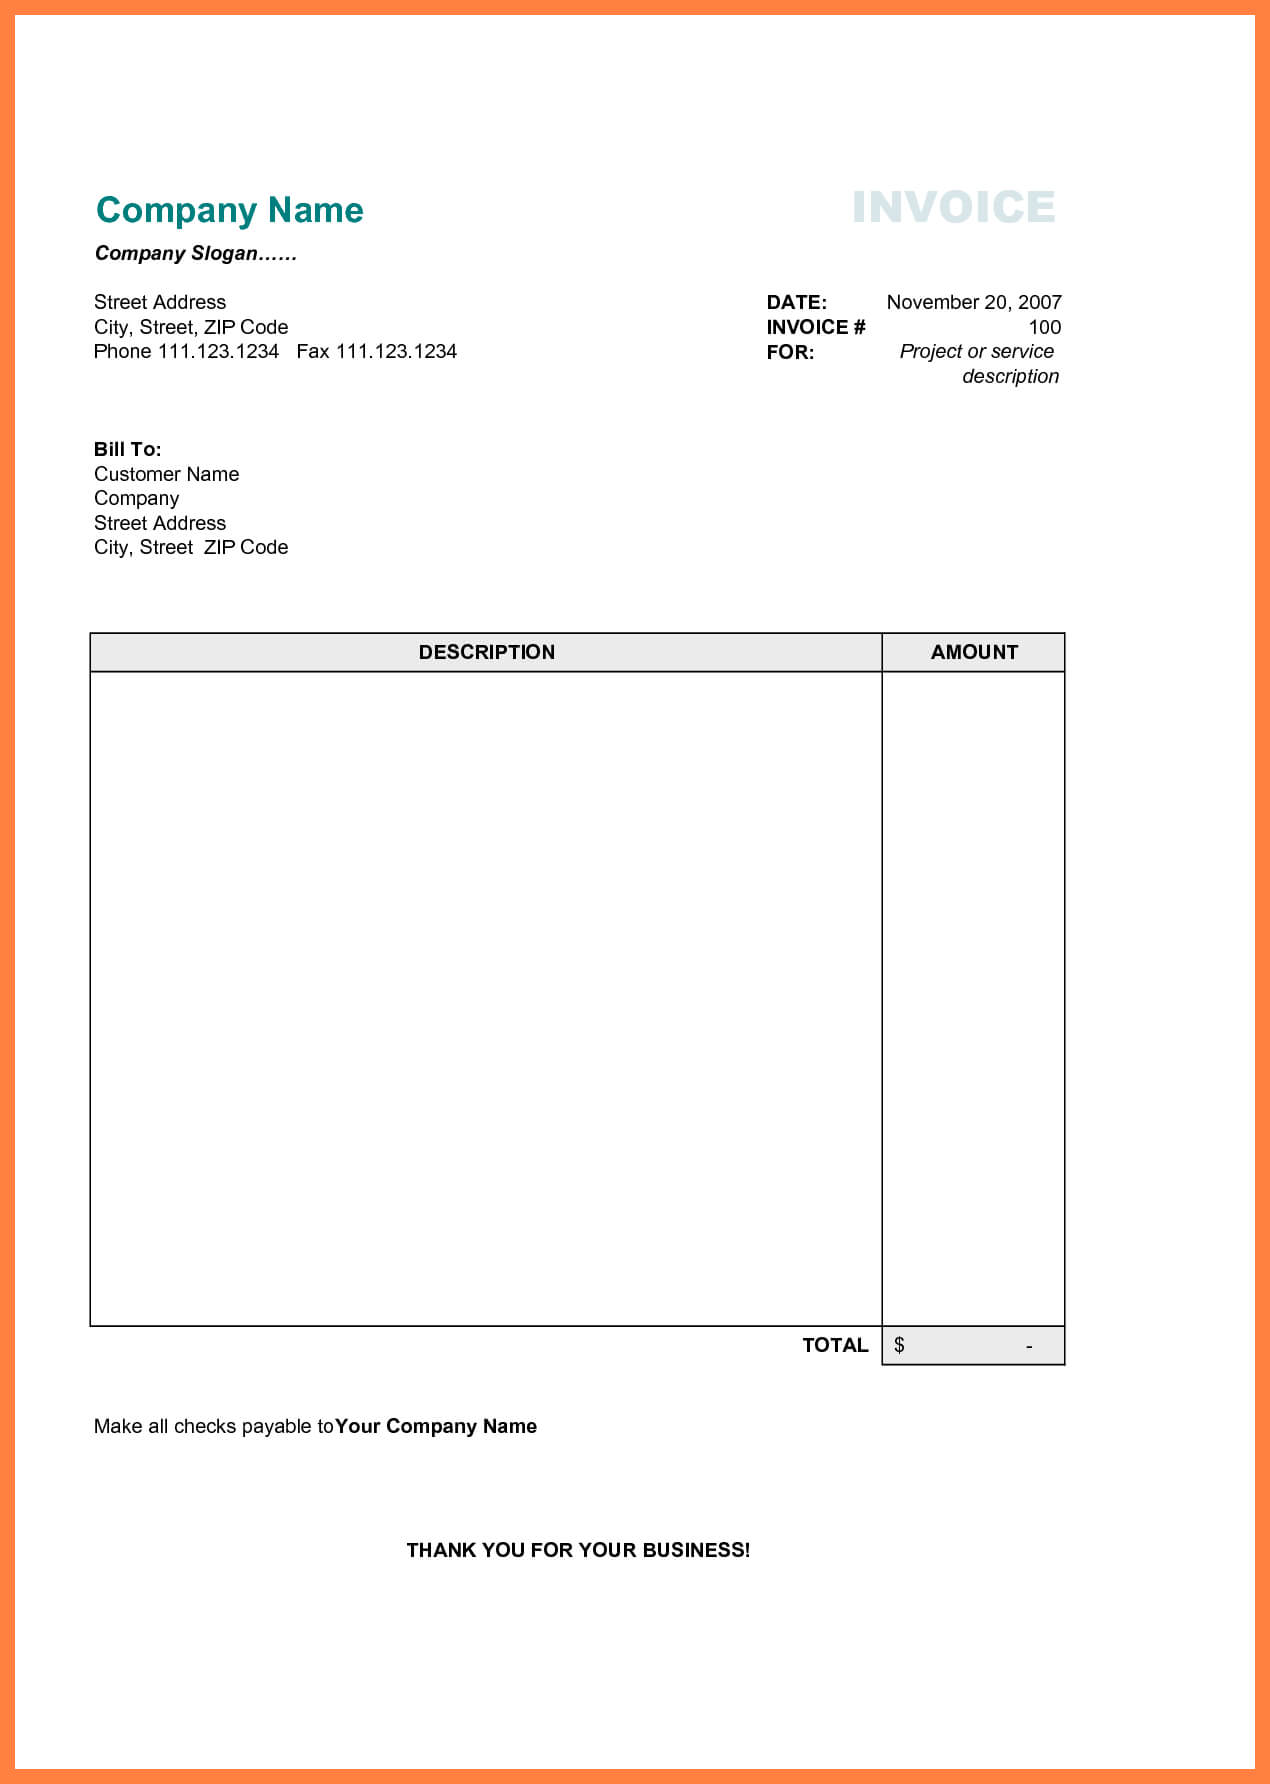 Free Printable Business Invoice Template - Invoice Format In With Free Printable Invoice Template Microsoft Word